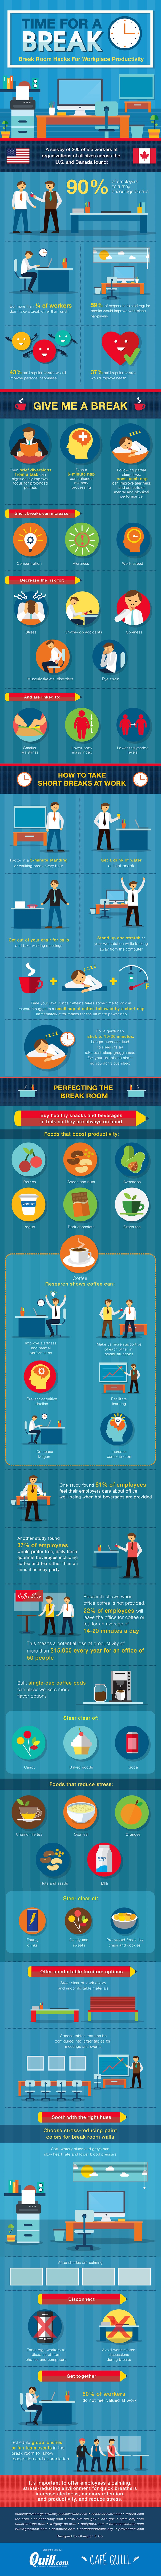 Stock Your Break Room for Better Productivity (Infographic)